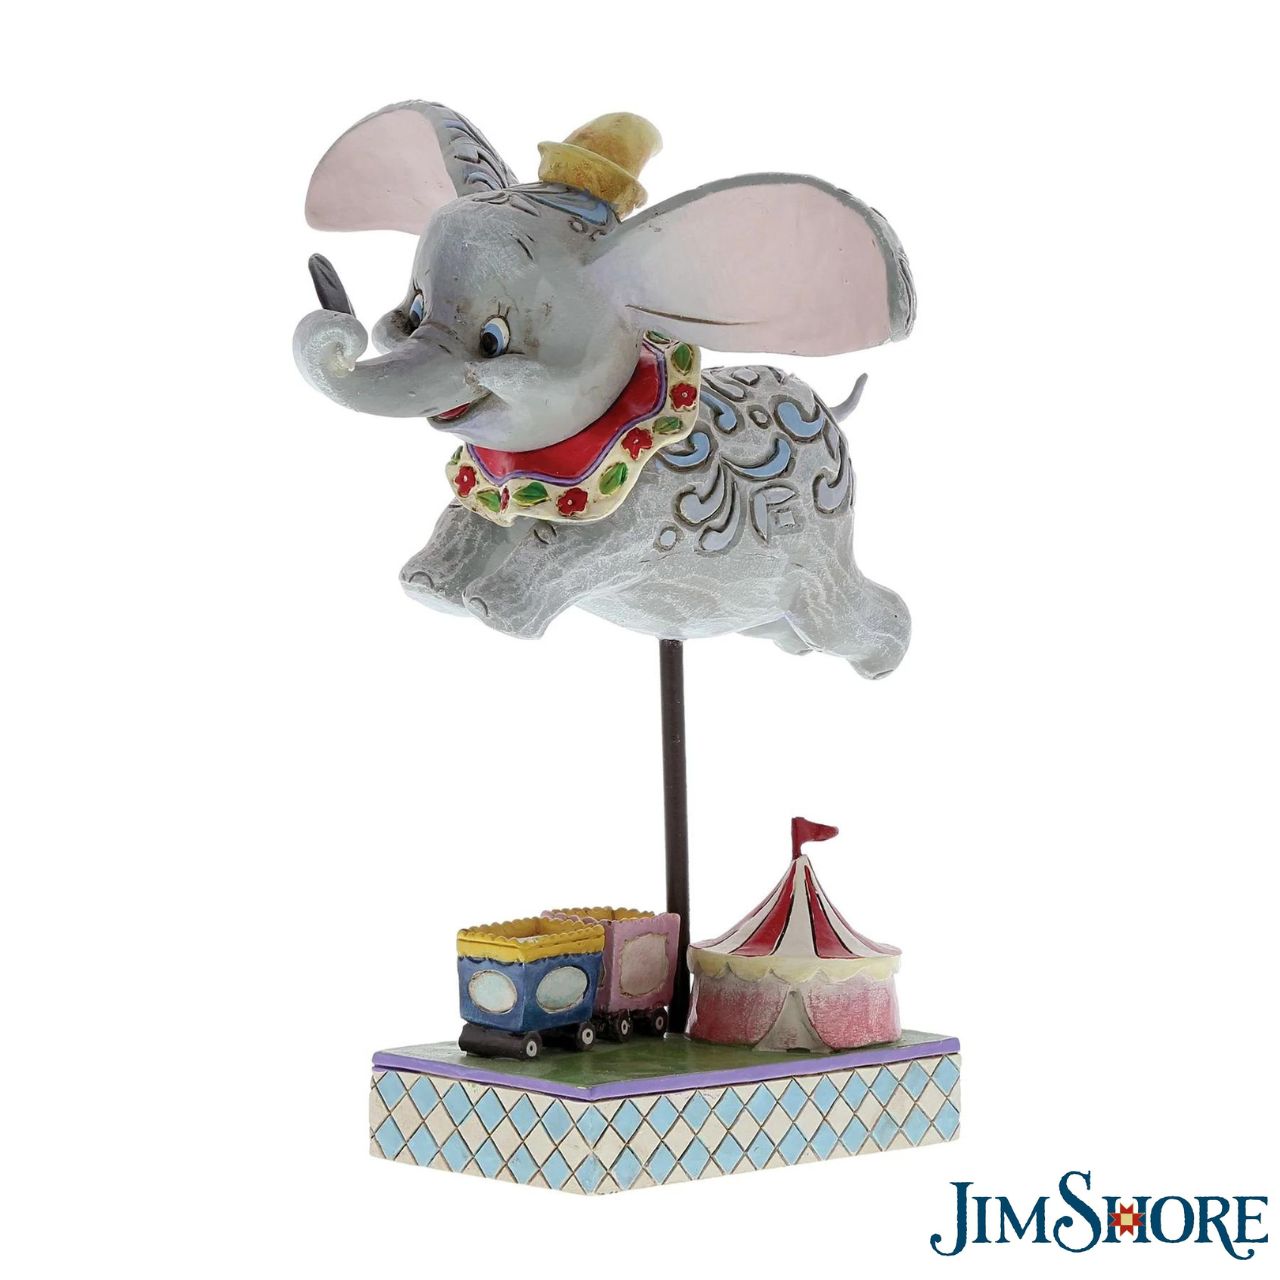 Jim Shore Dumbo Faith in Flight Figurine  Faith in Flight (Dumbo Figurine)  Disney Traditions combines the magic of Disney with the American folk artistry of Jim Shore. Enjoy this wonderful figurine of beloved Dumbo as he takes his first flight with the help of a magical feather.